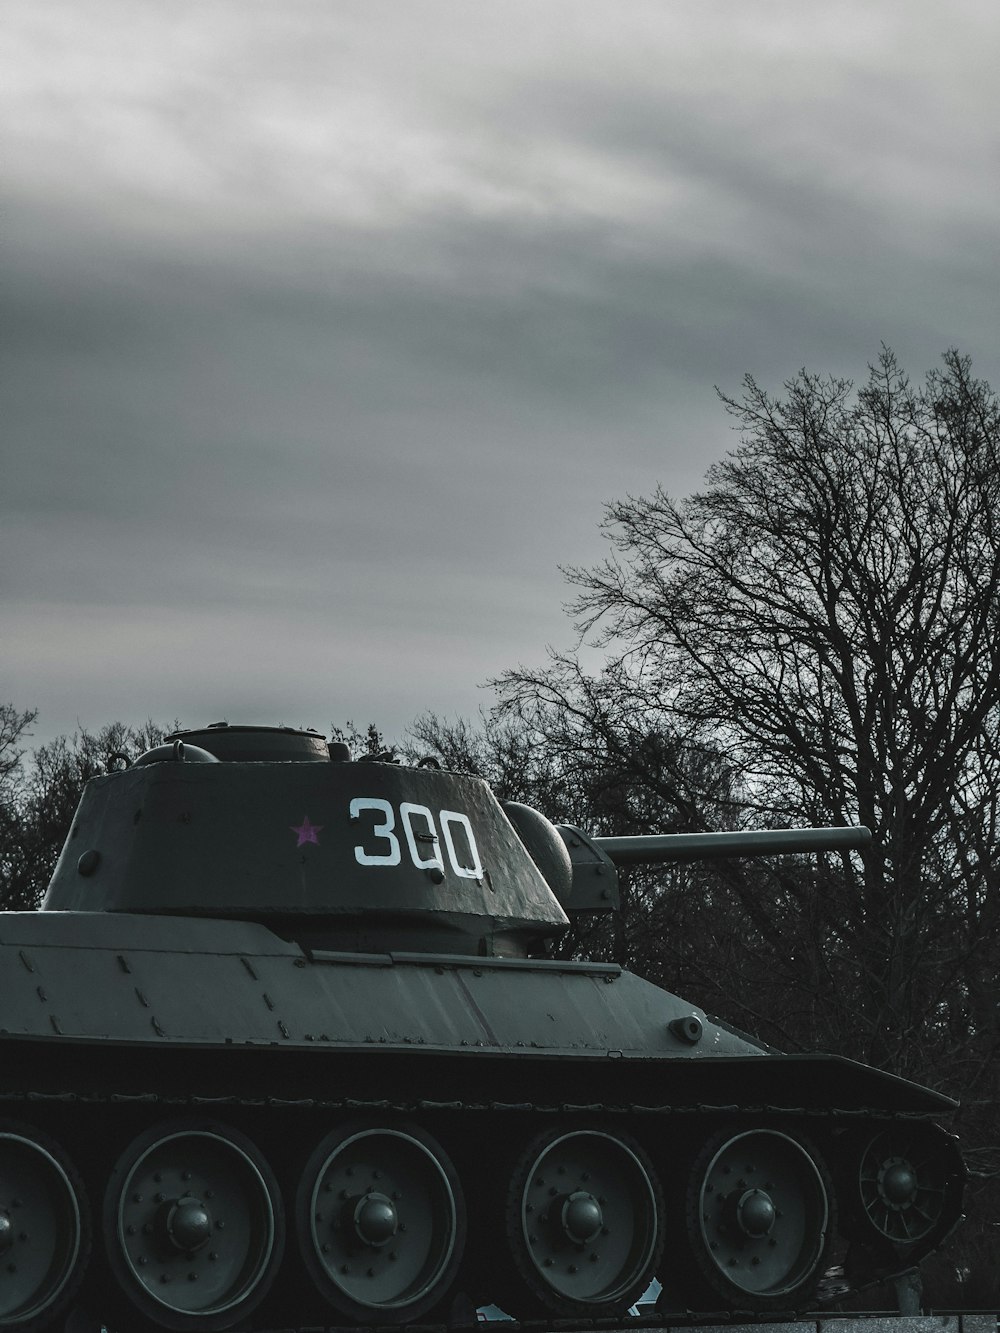 a tank sitting in the middle of a field